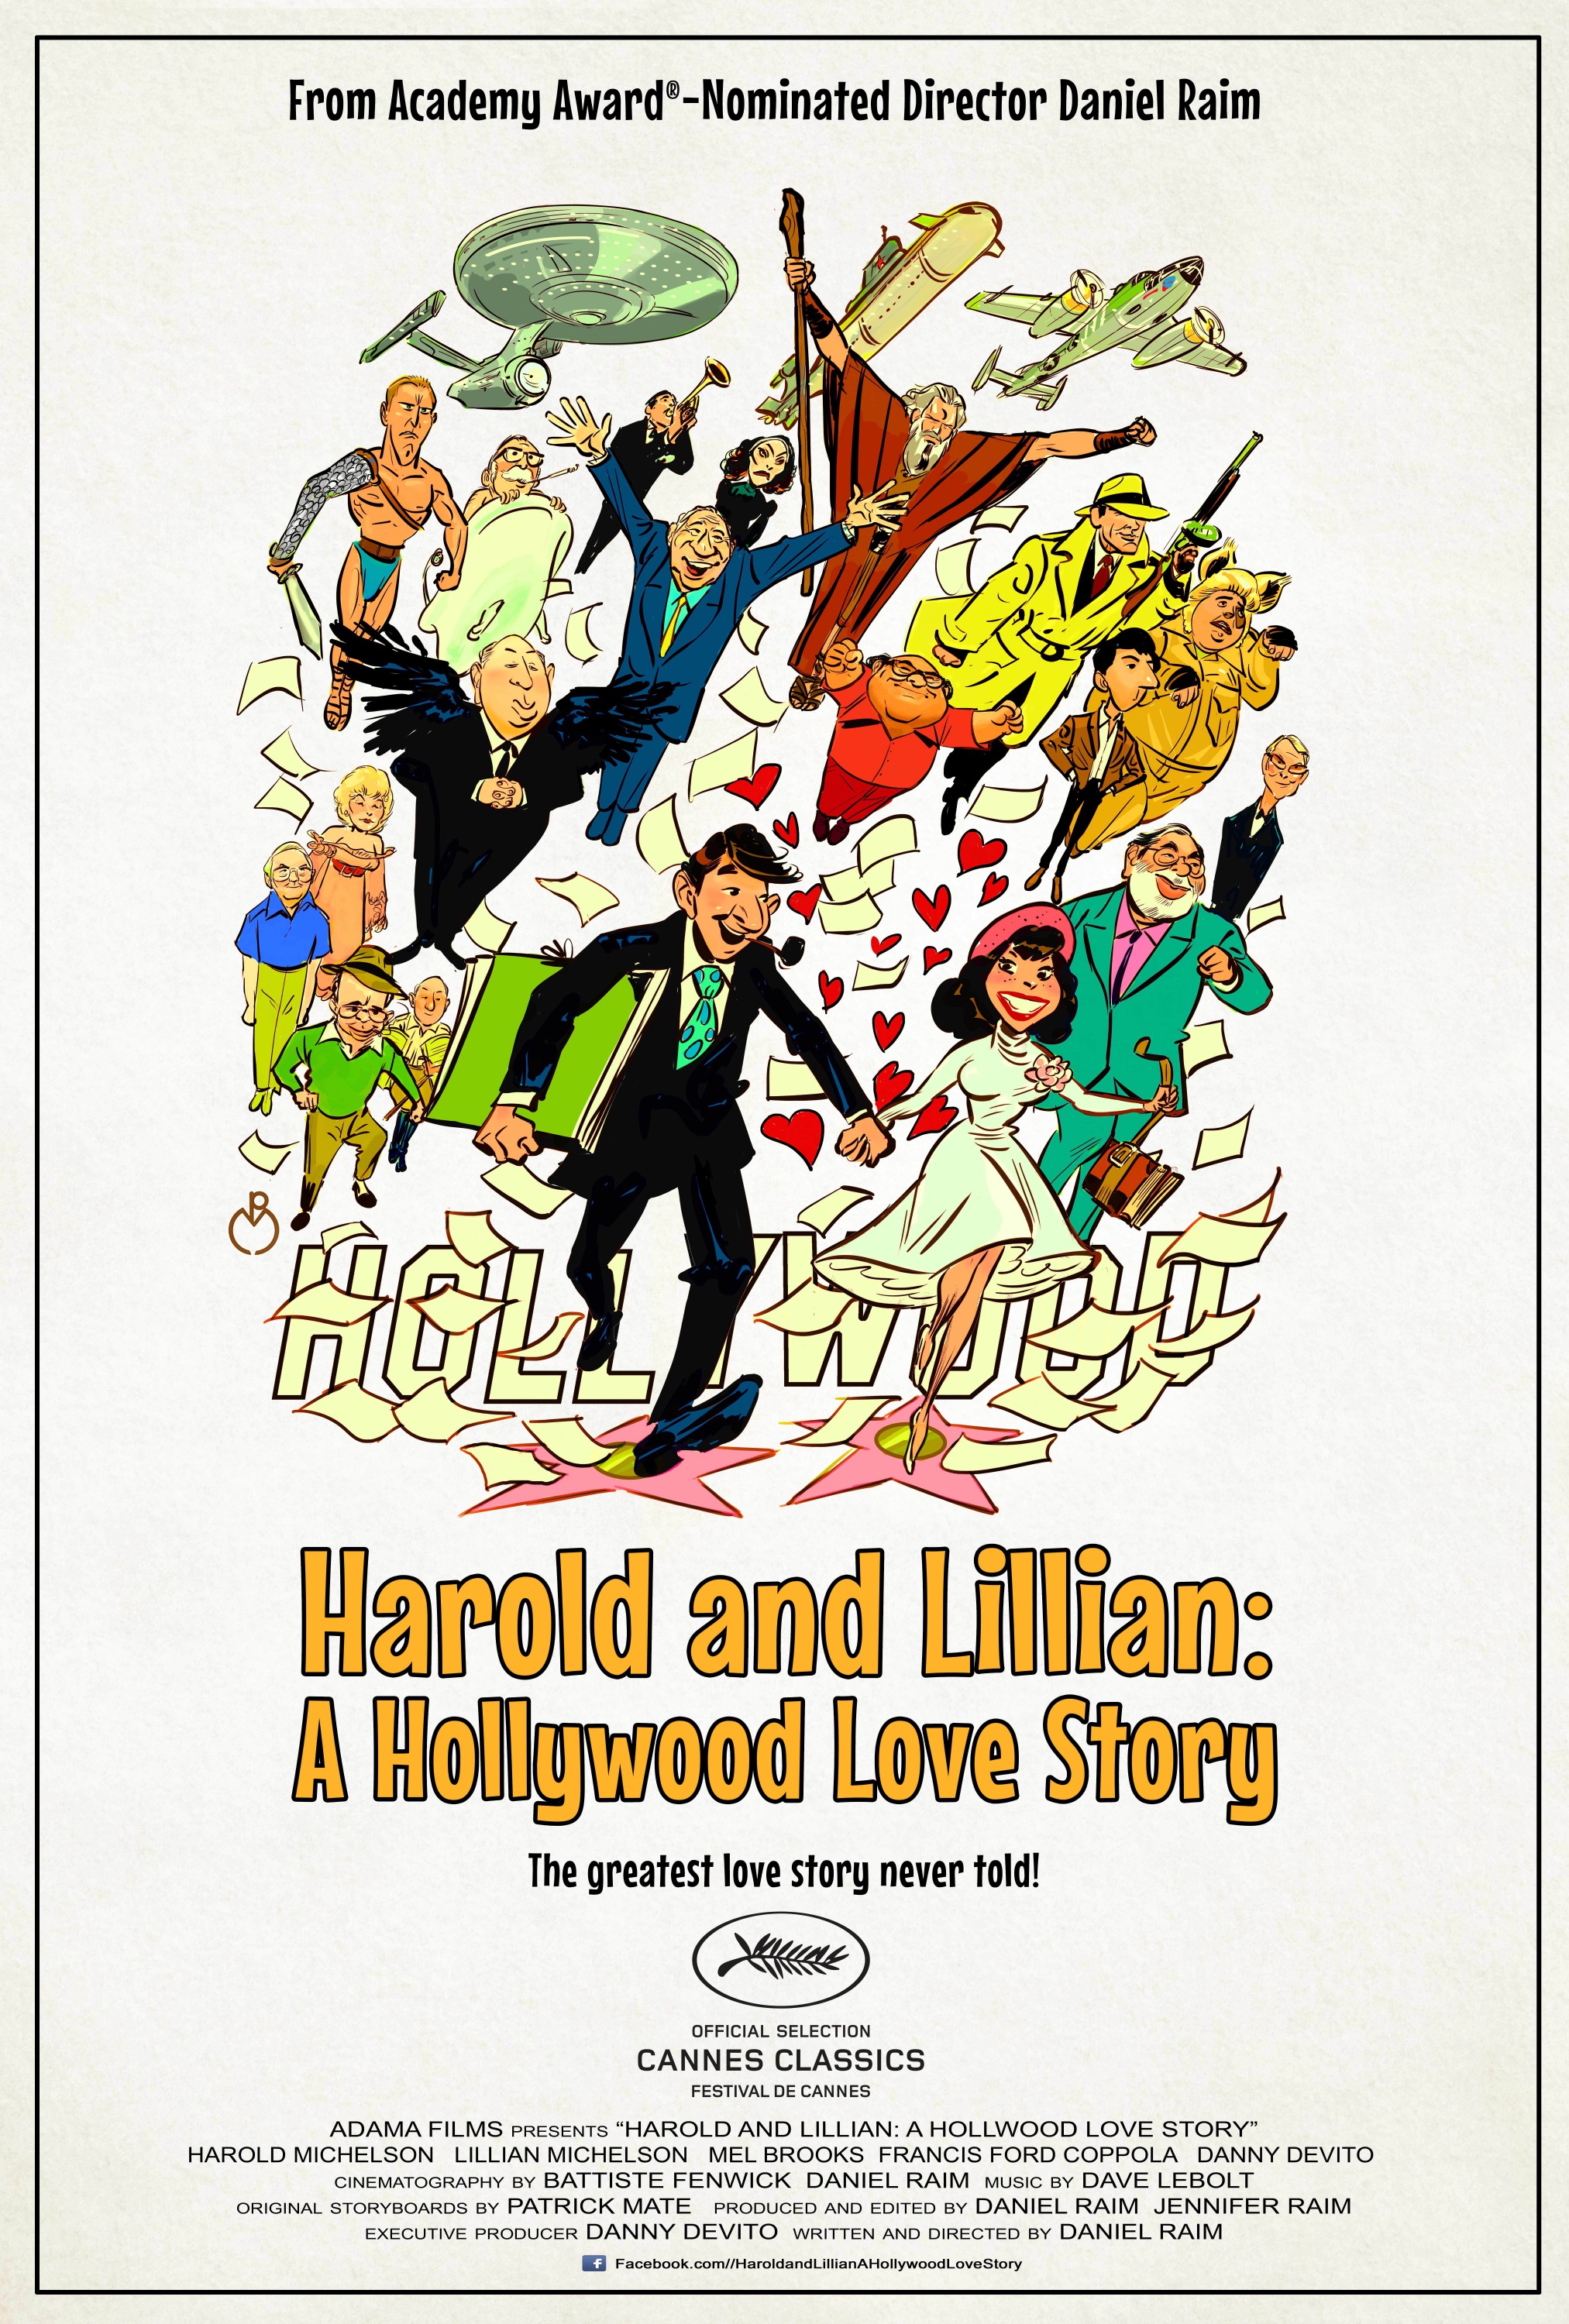 Harold and Lilian: A Hollywood Love Story